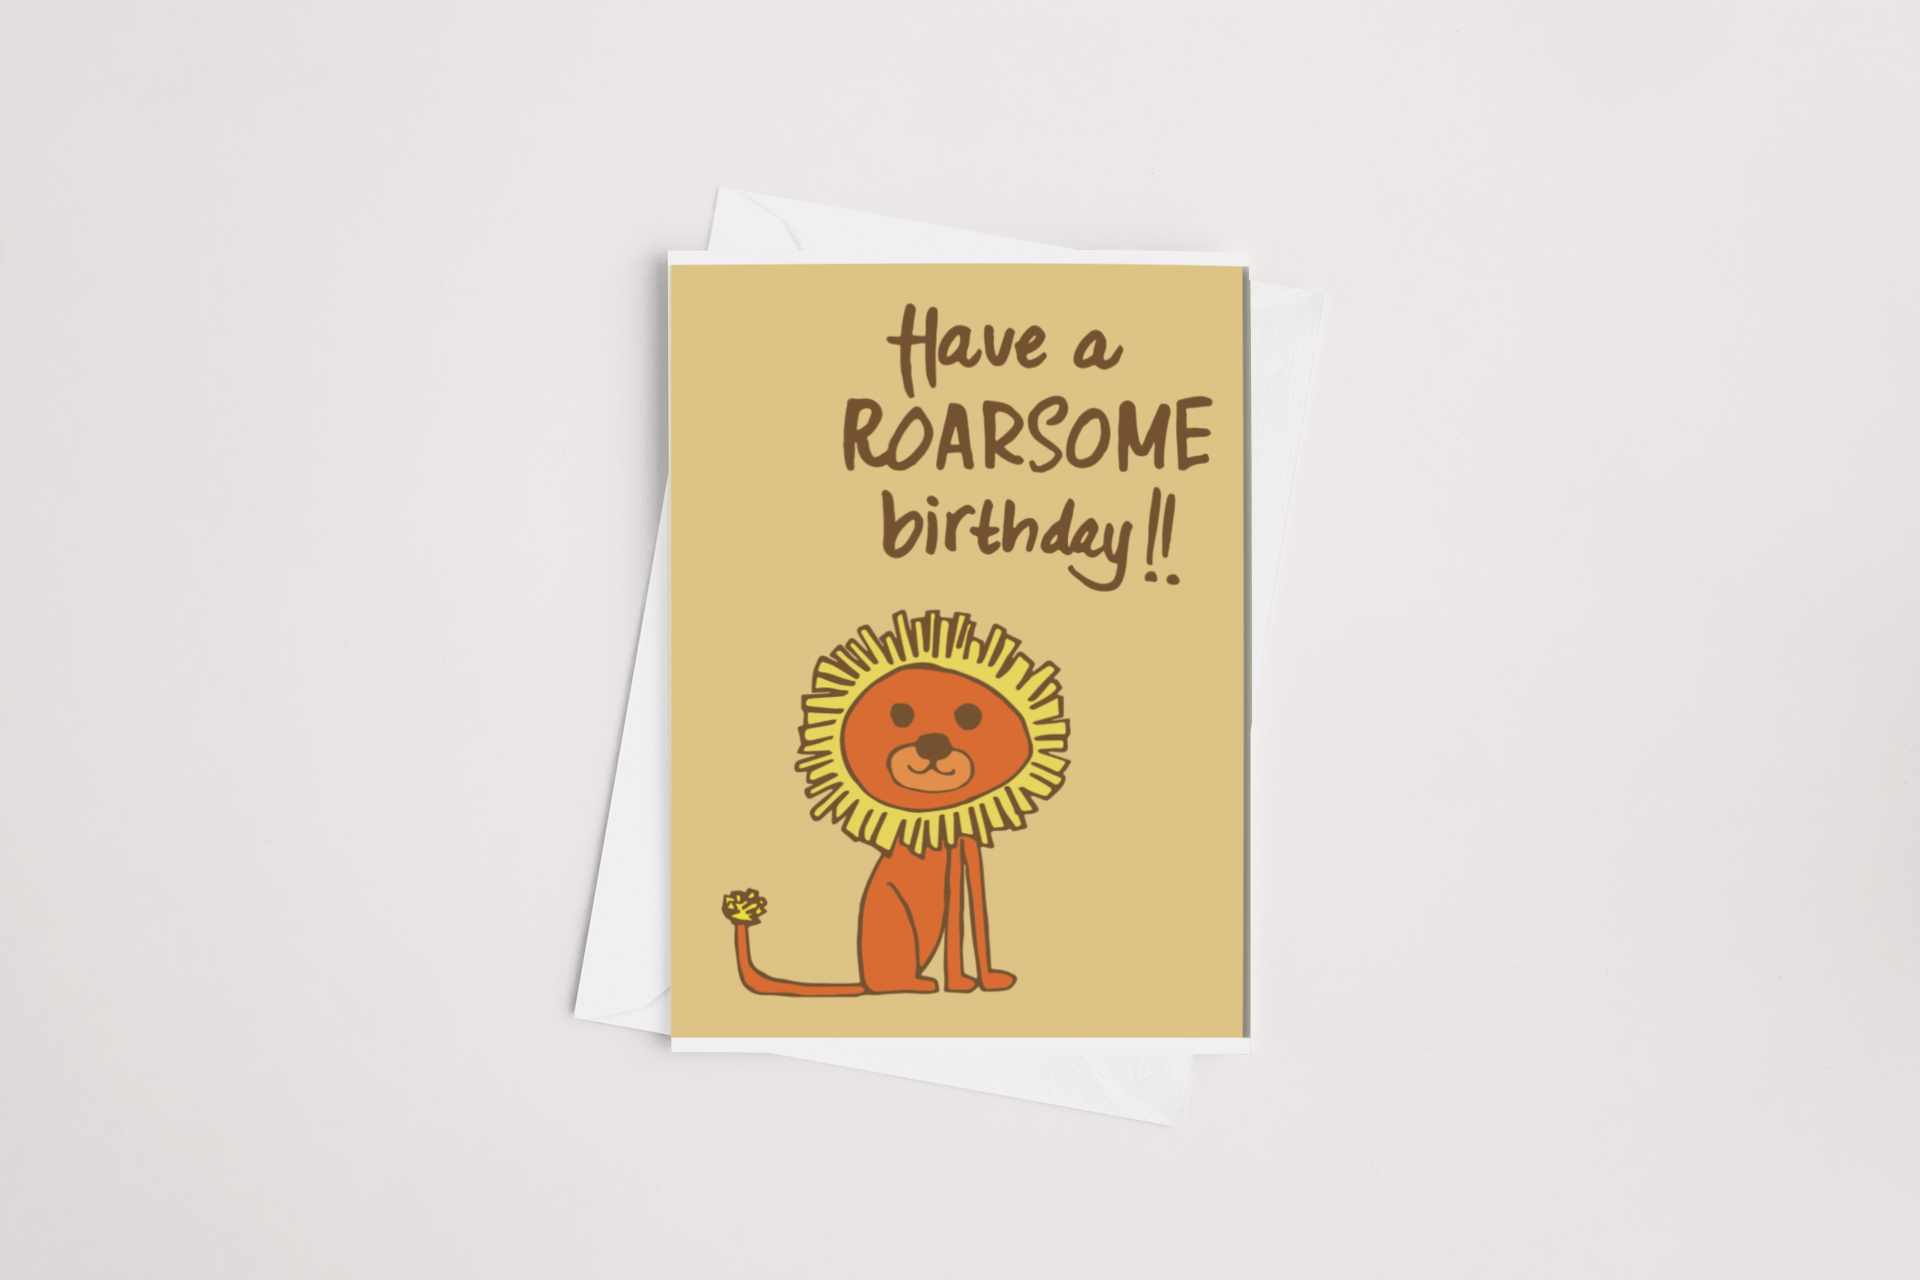 A cheerful birthday greeting card from Tuesday Print, featuring a cartoon lion with the punny greeting "have a Roarsome Birthday!!" against a yellow background.